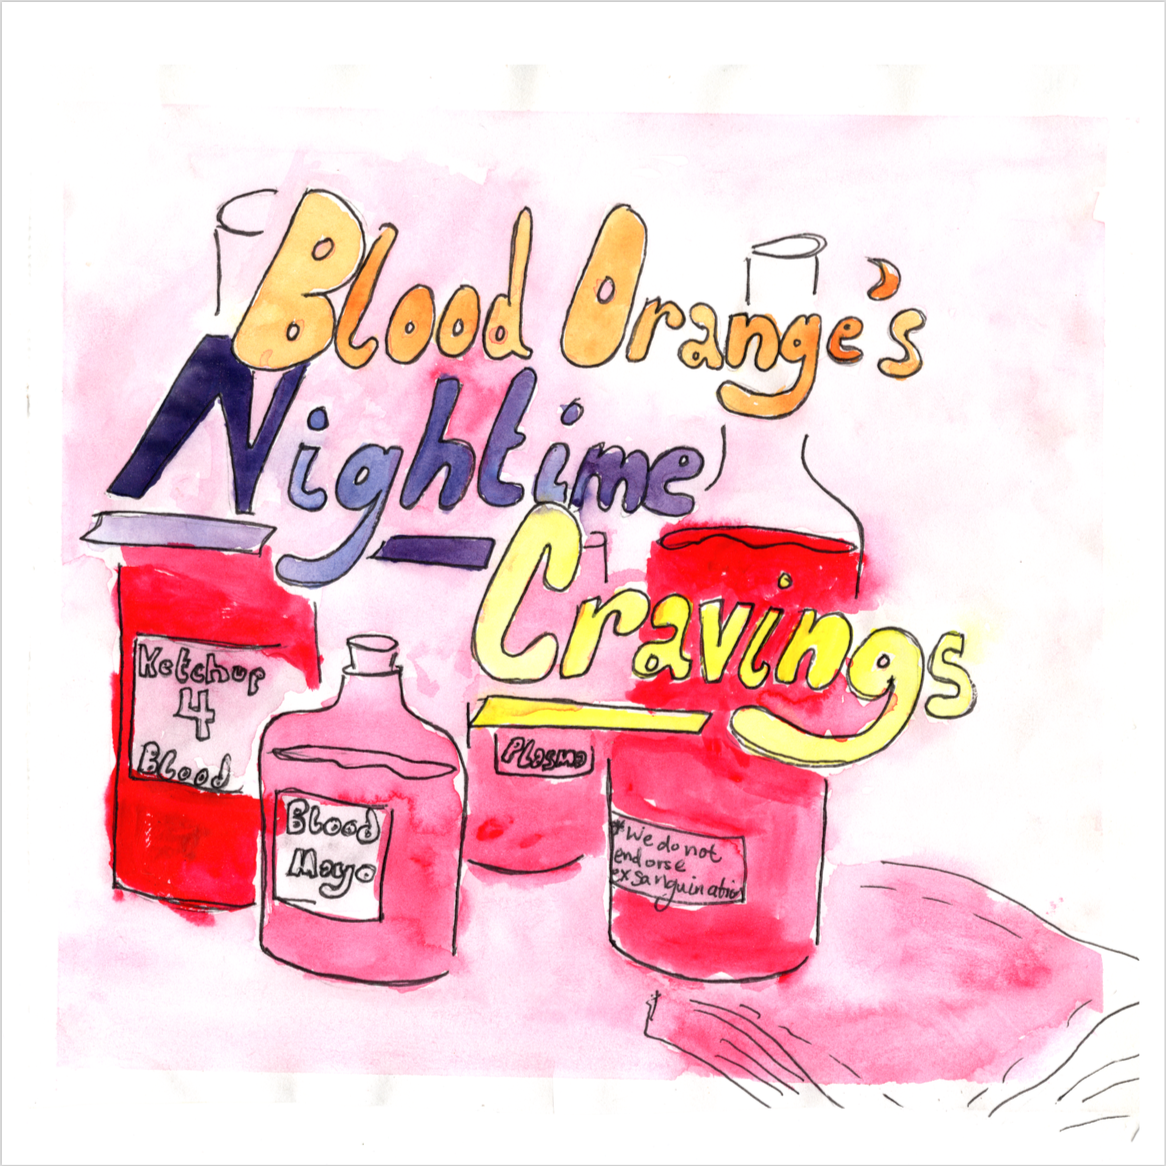 Bubbly text reading Blood Orange's Nighttime Craving, over an assortment of blood condiments